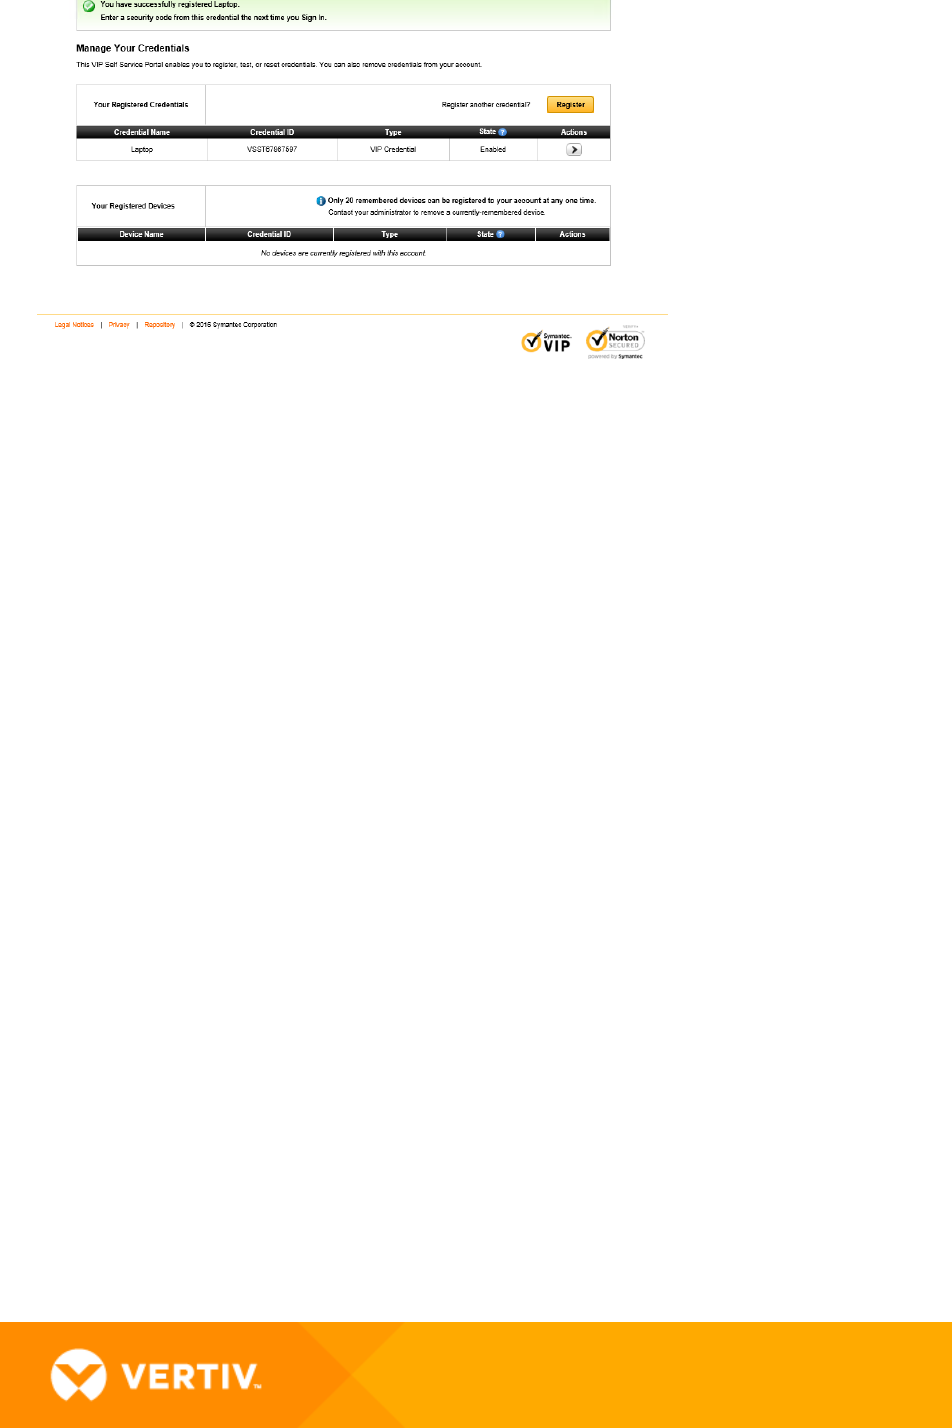 Page 6 of 8 - Vertiv Employee Remote Access And VIP End User Guide-Verizon Guide